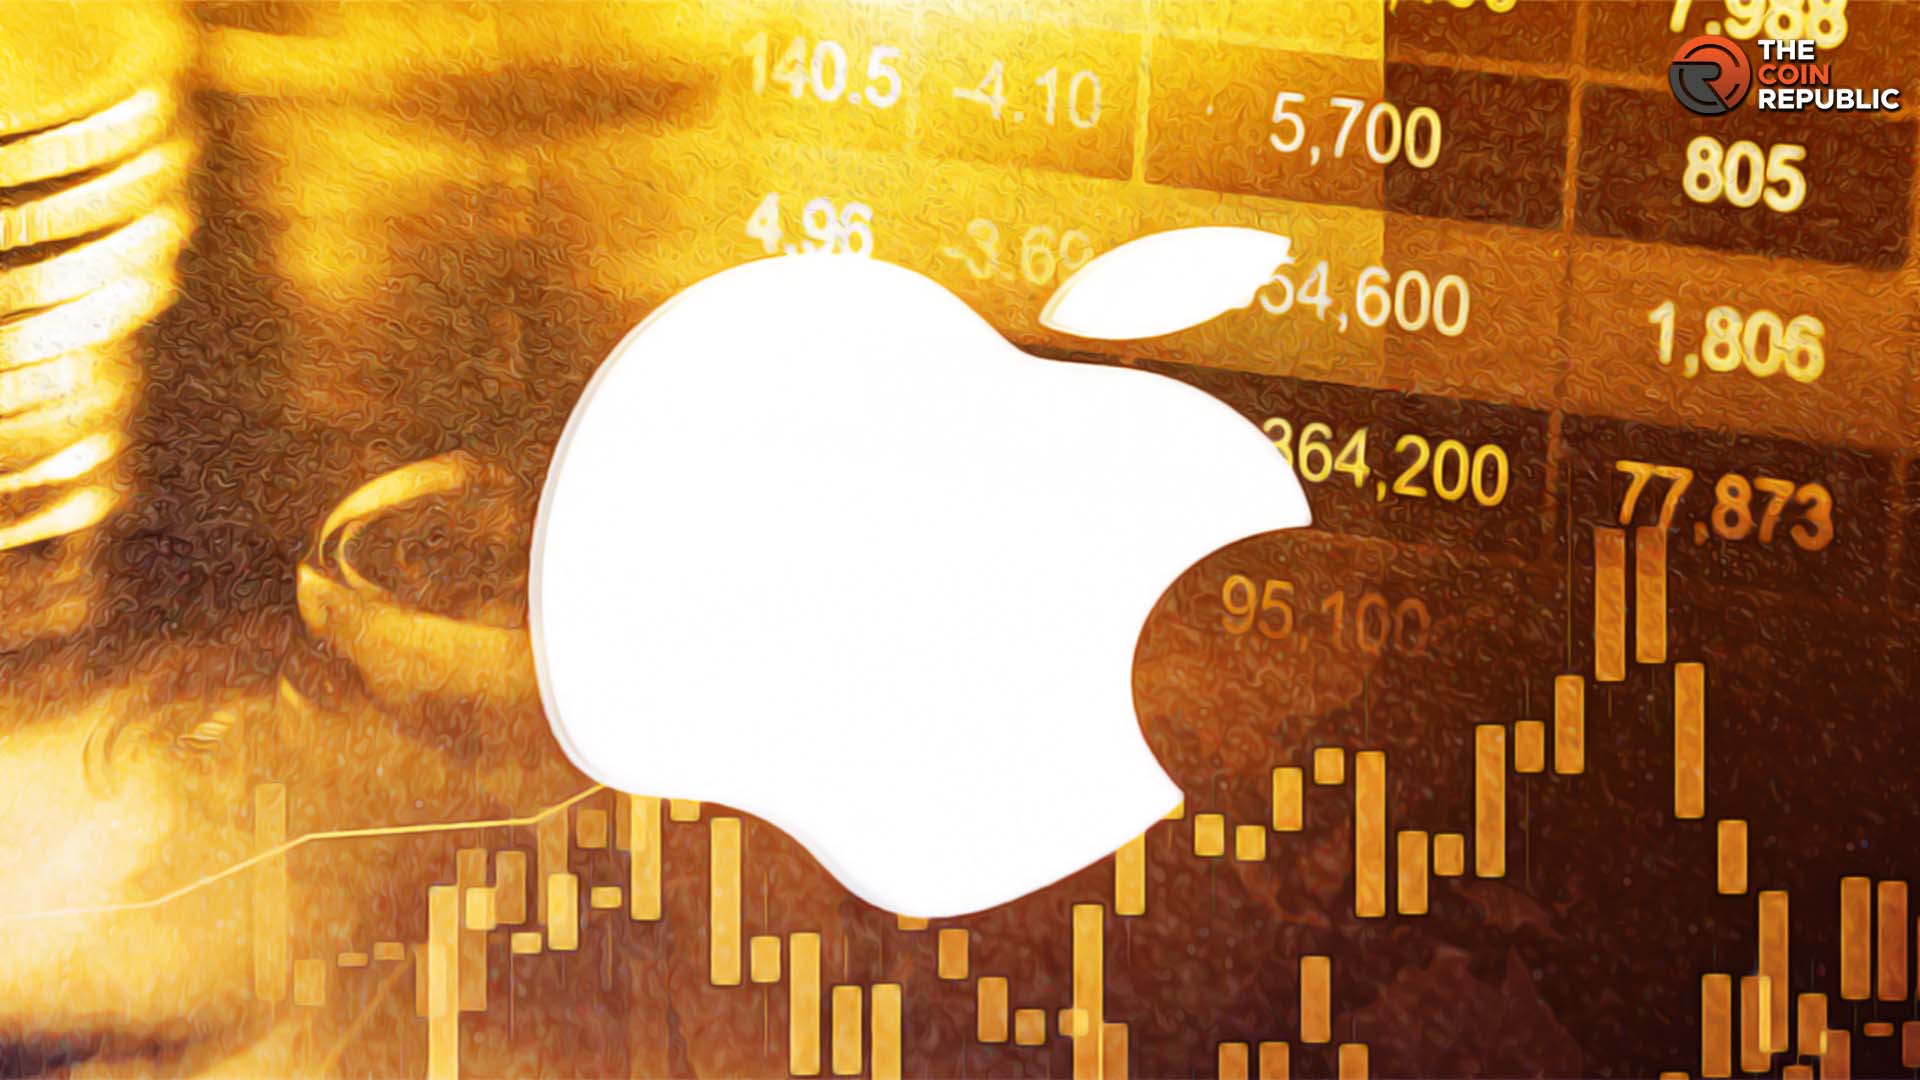 Apple (AAPL) Stock Price Plunged on This Monday Trading Session